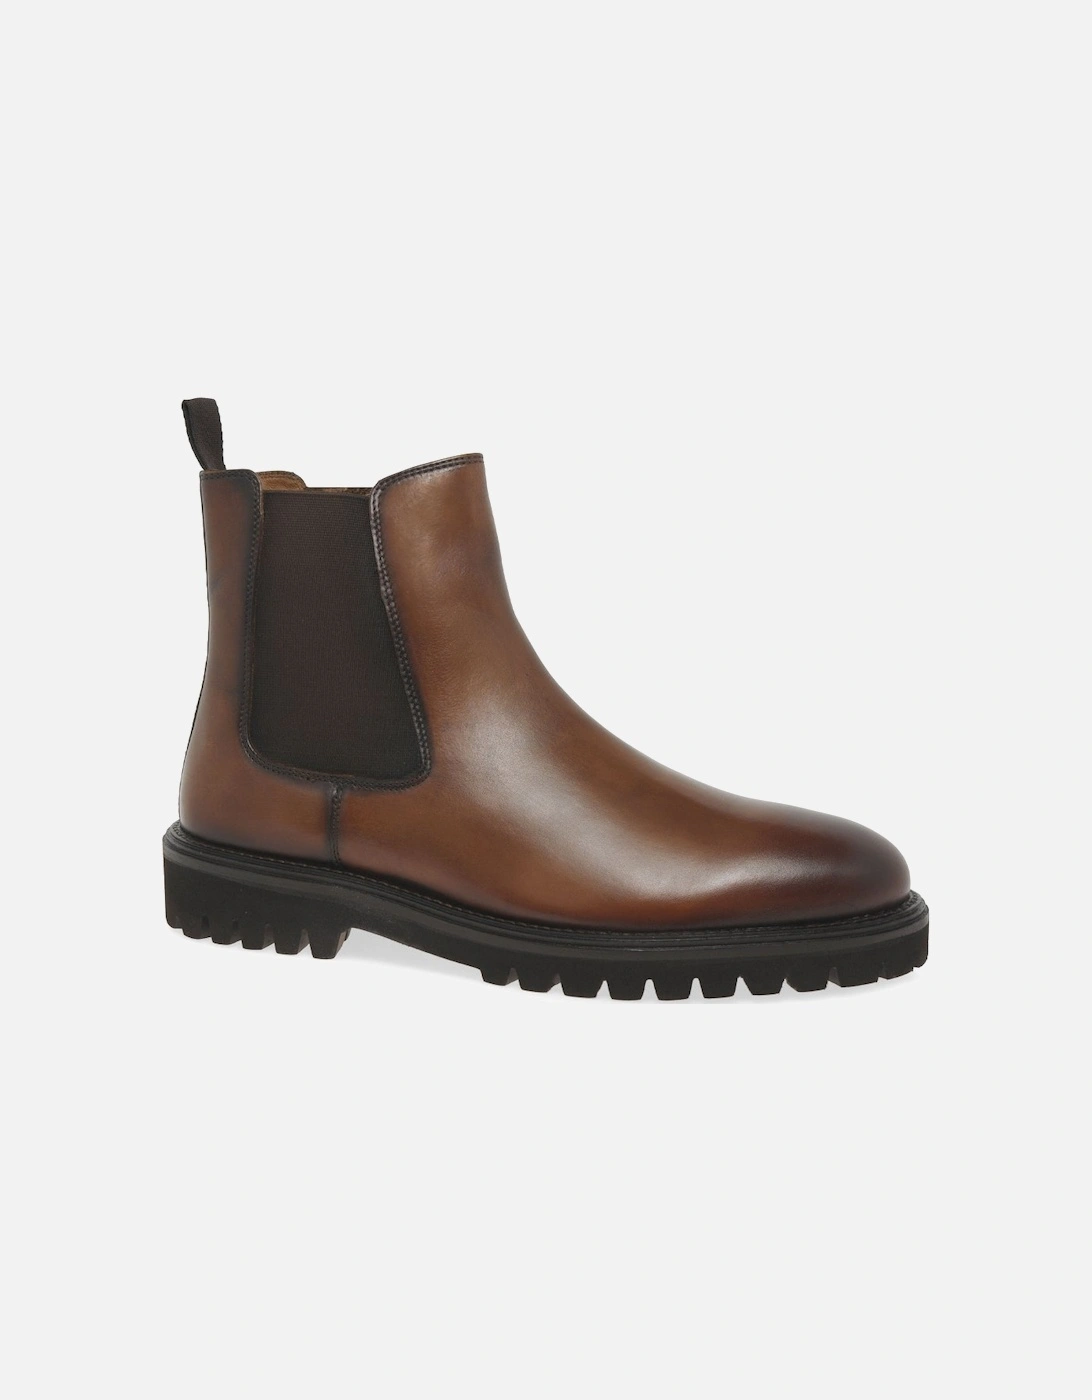 Romed 02 Mens Chelsea Boots, 9 of 8